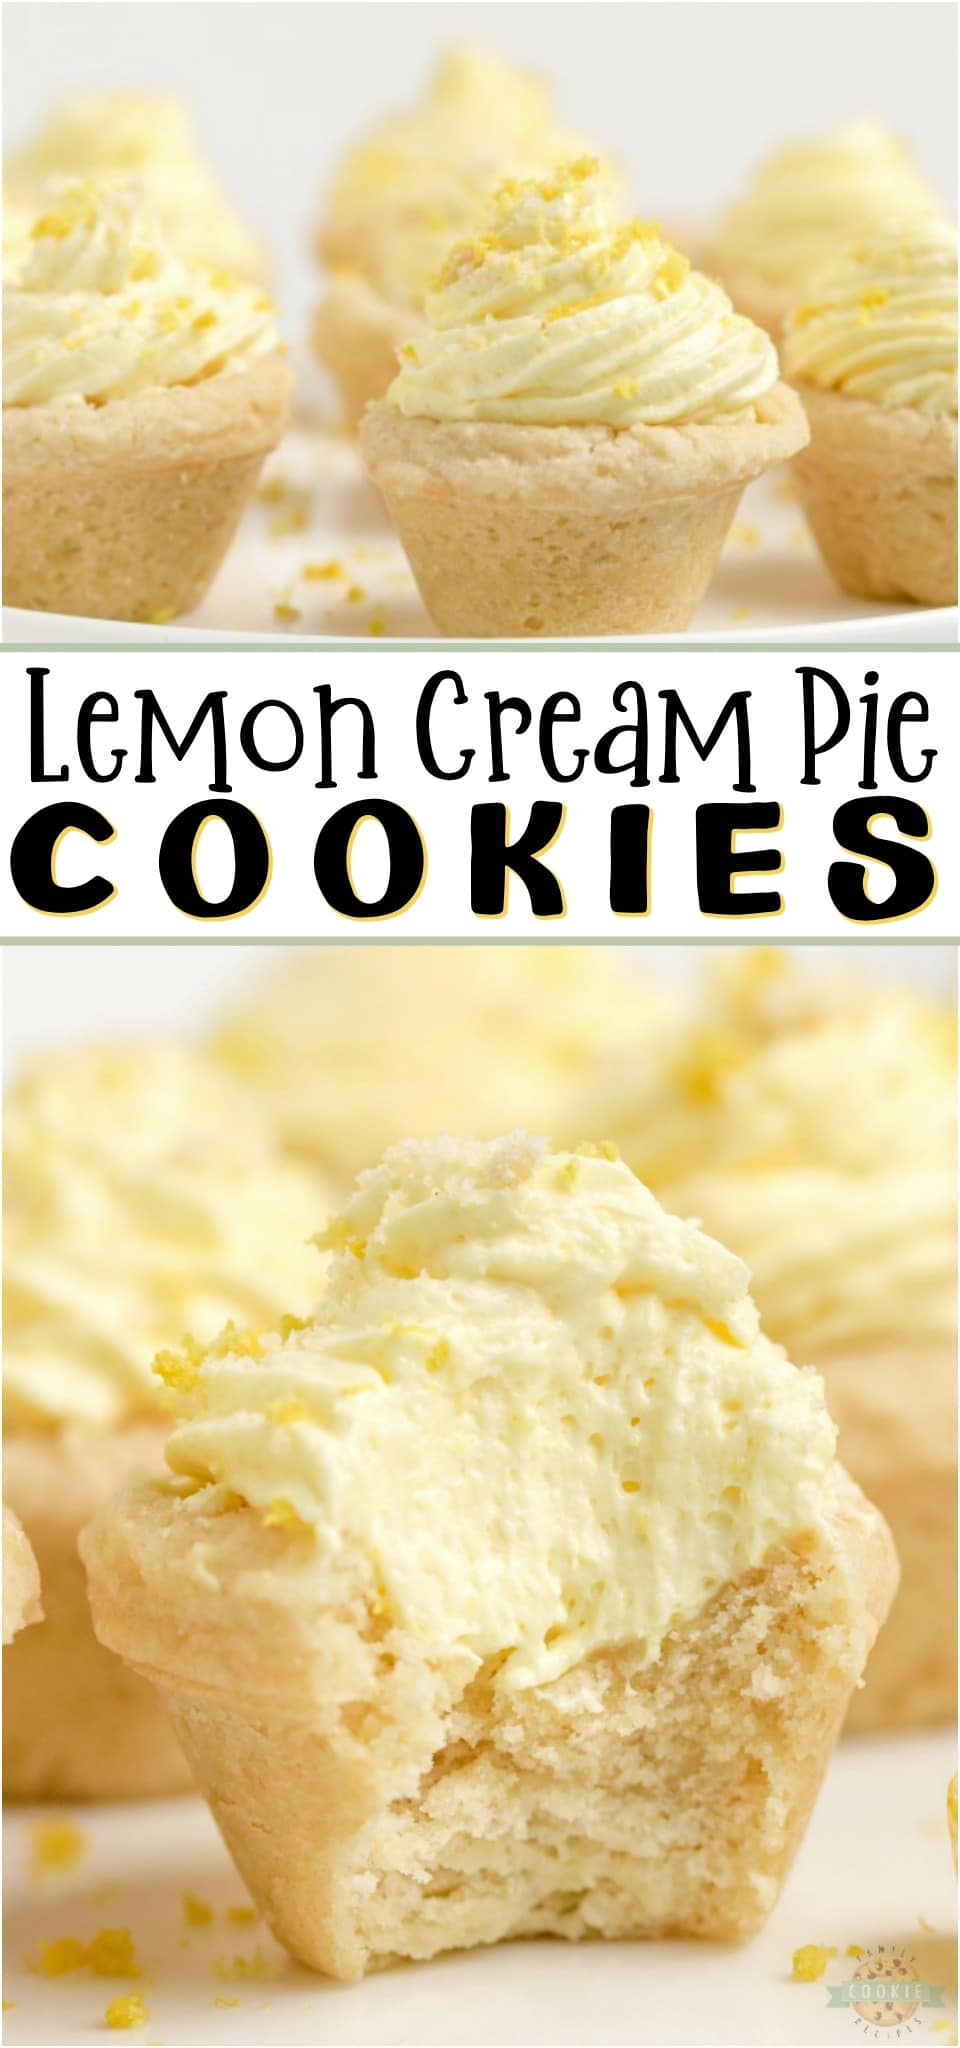 Lemon cream pie cookies are a delicious way to enjoy the tastes of a lemon cream pie without the hassle of pie crust. These lemon cookie cups are easy to grab and go and this lemon cookie recipe makes enough to share.